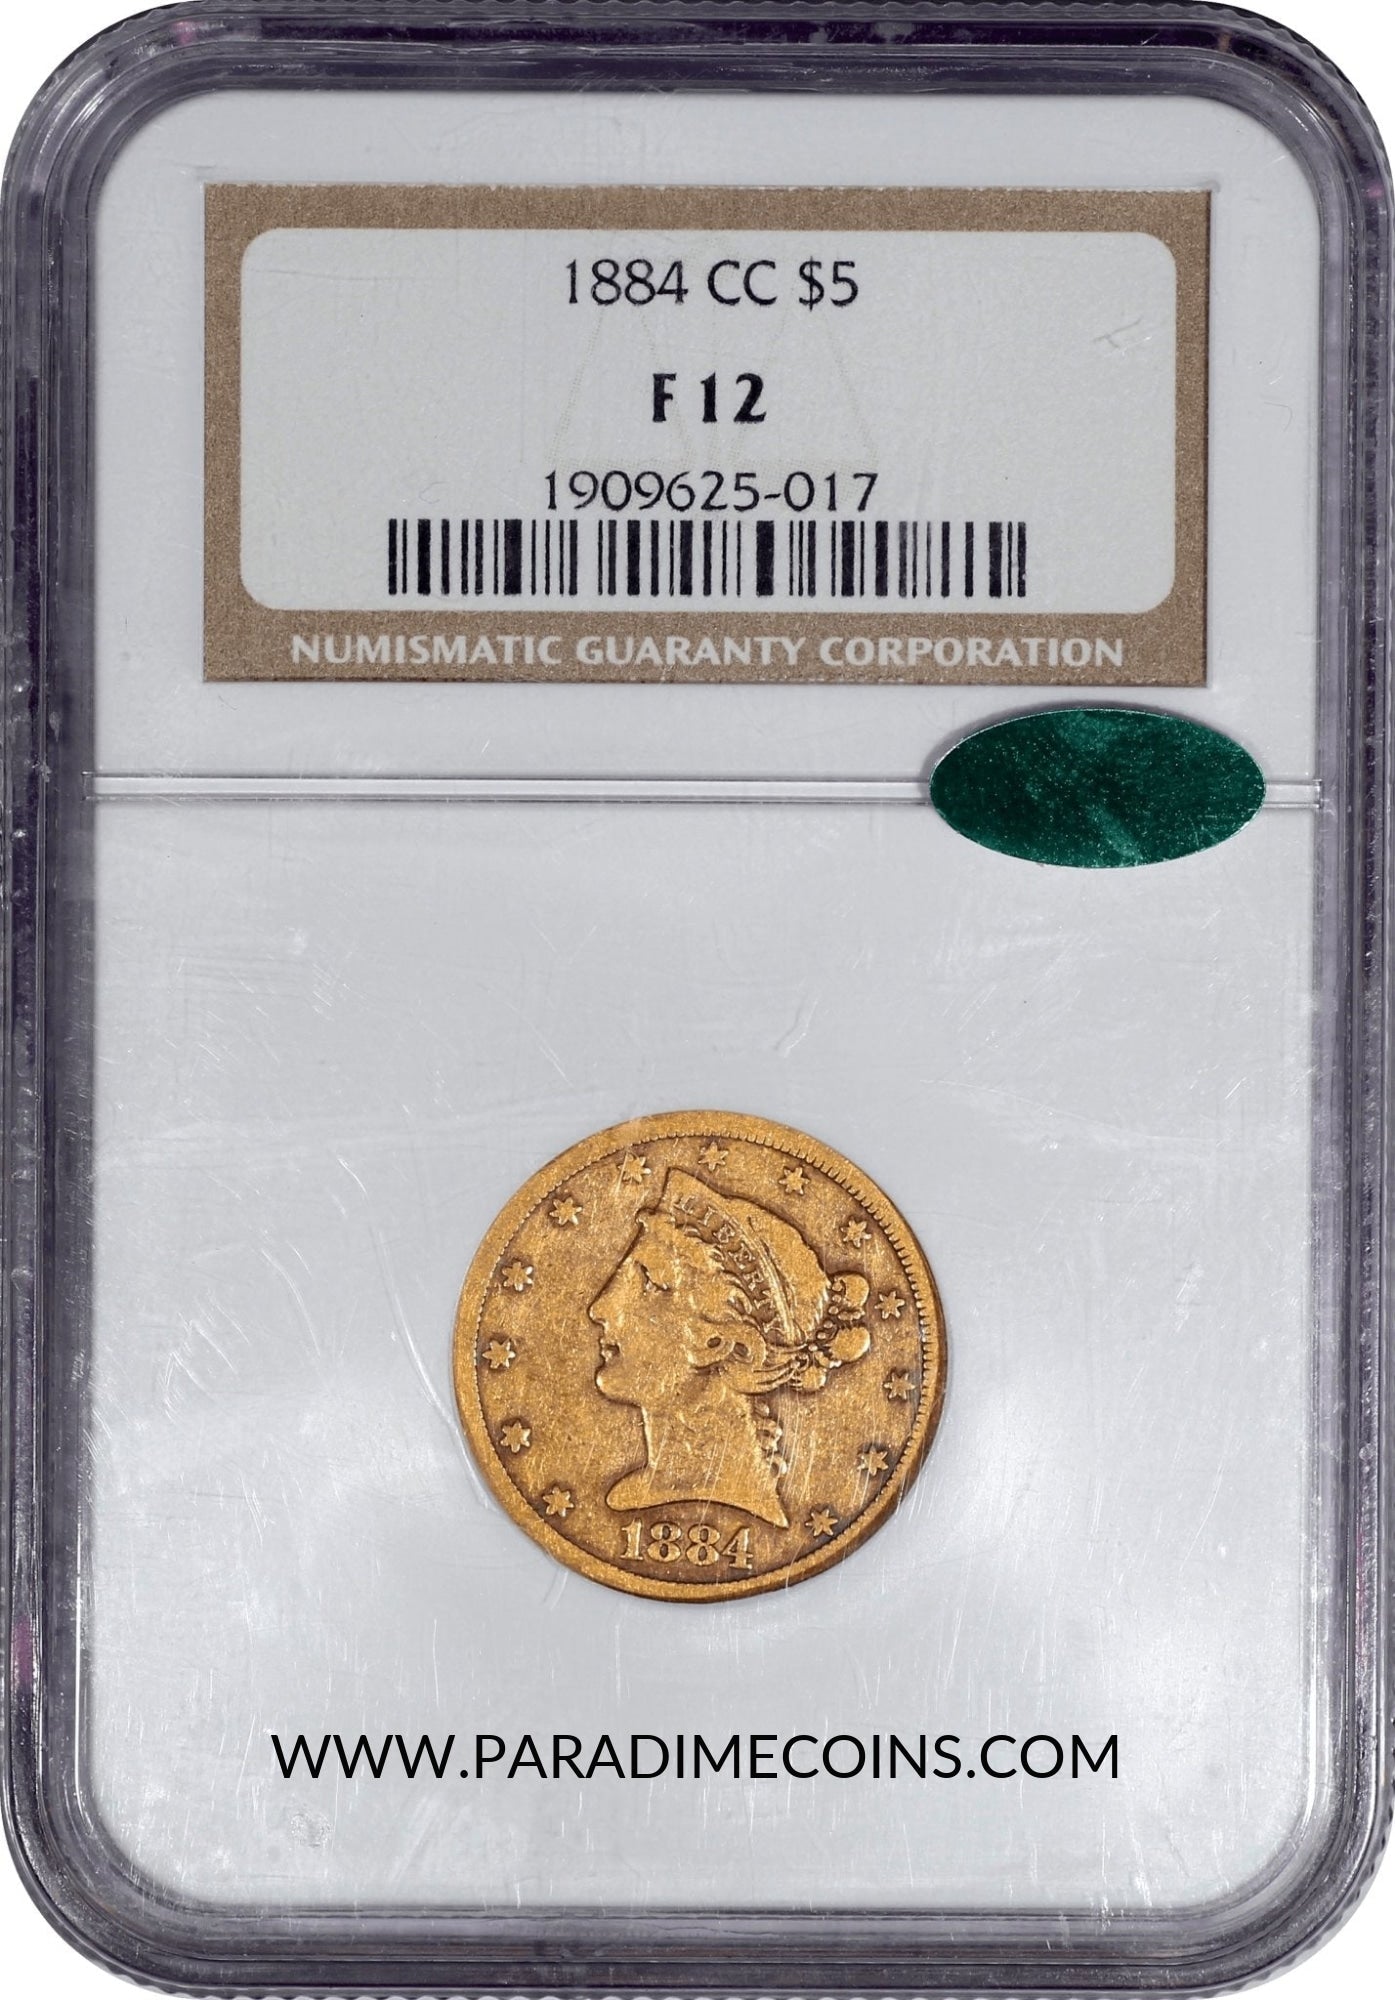 1884-CC $5 F12 NGC CAC - Paradime Coins | PCGS NGC CACG CAC Rare US Numismatic Coins For Sale